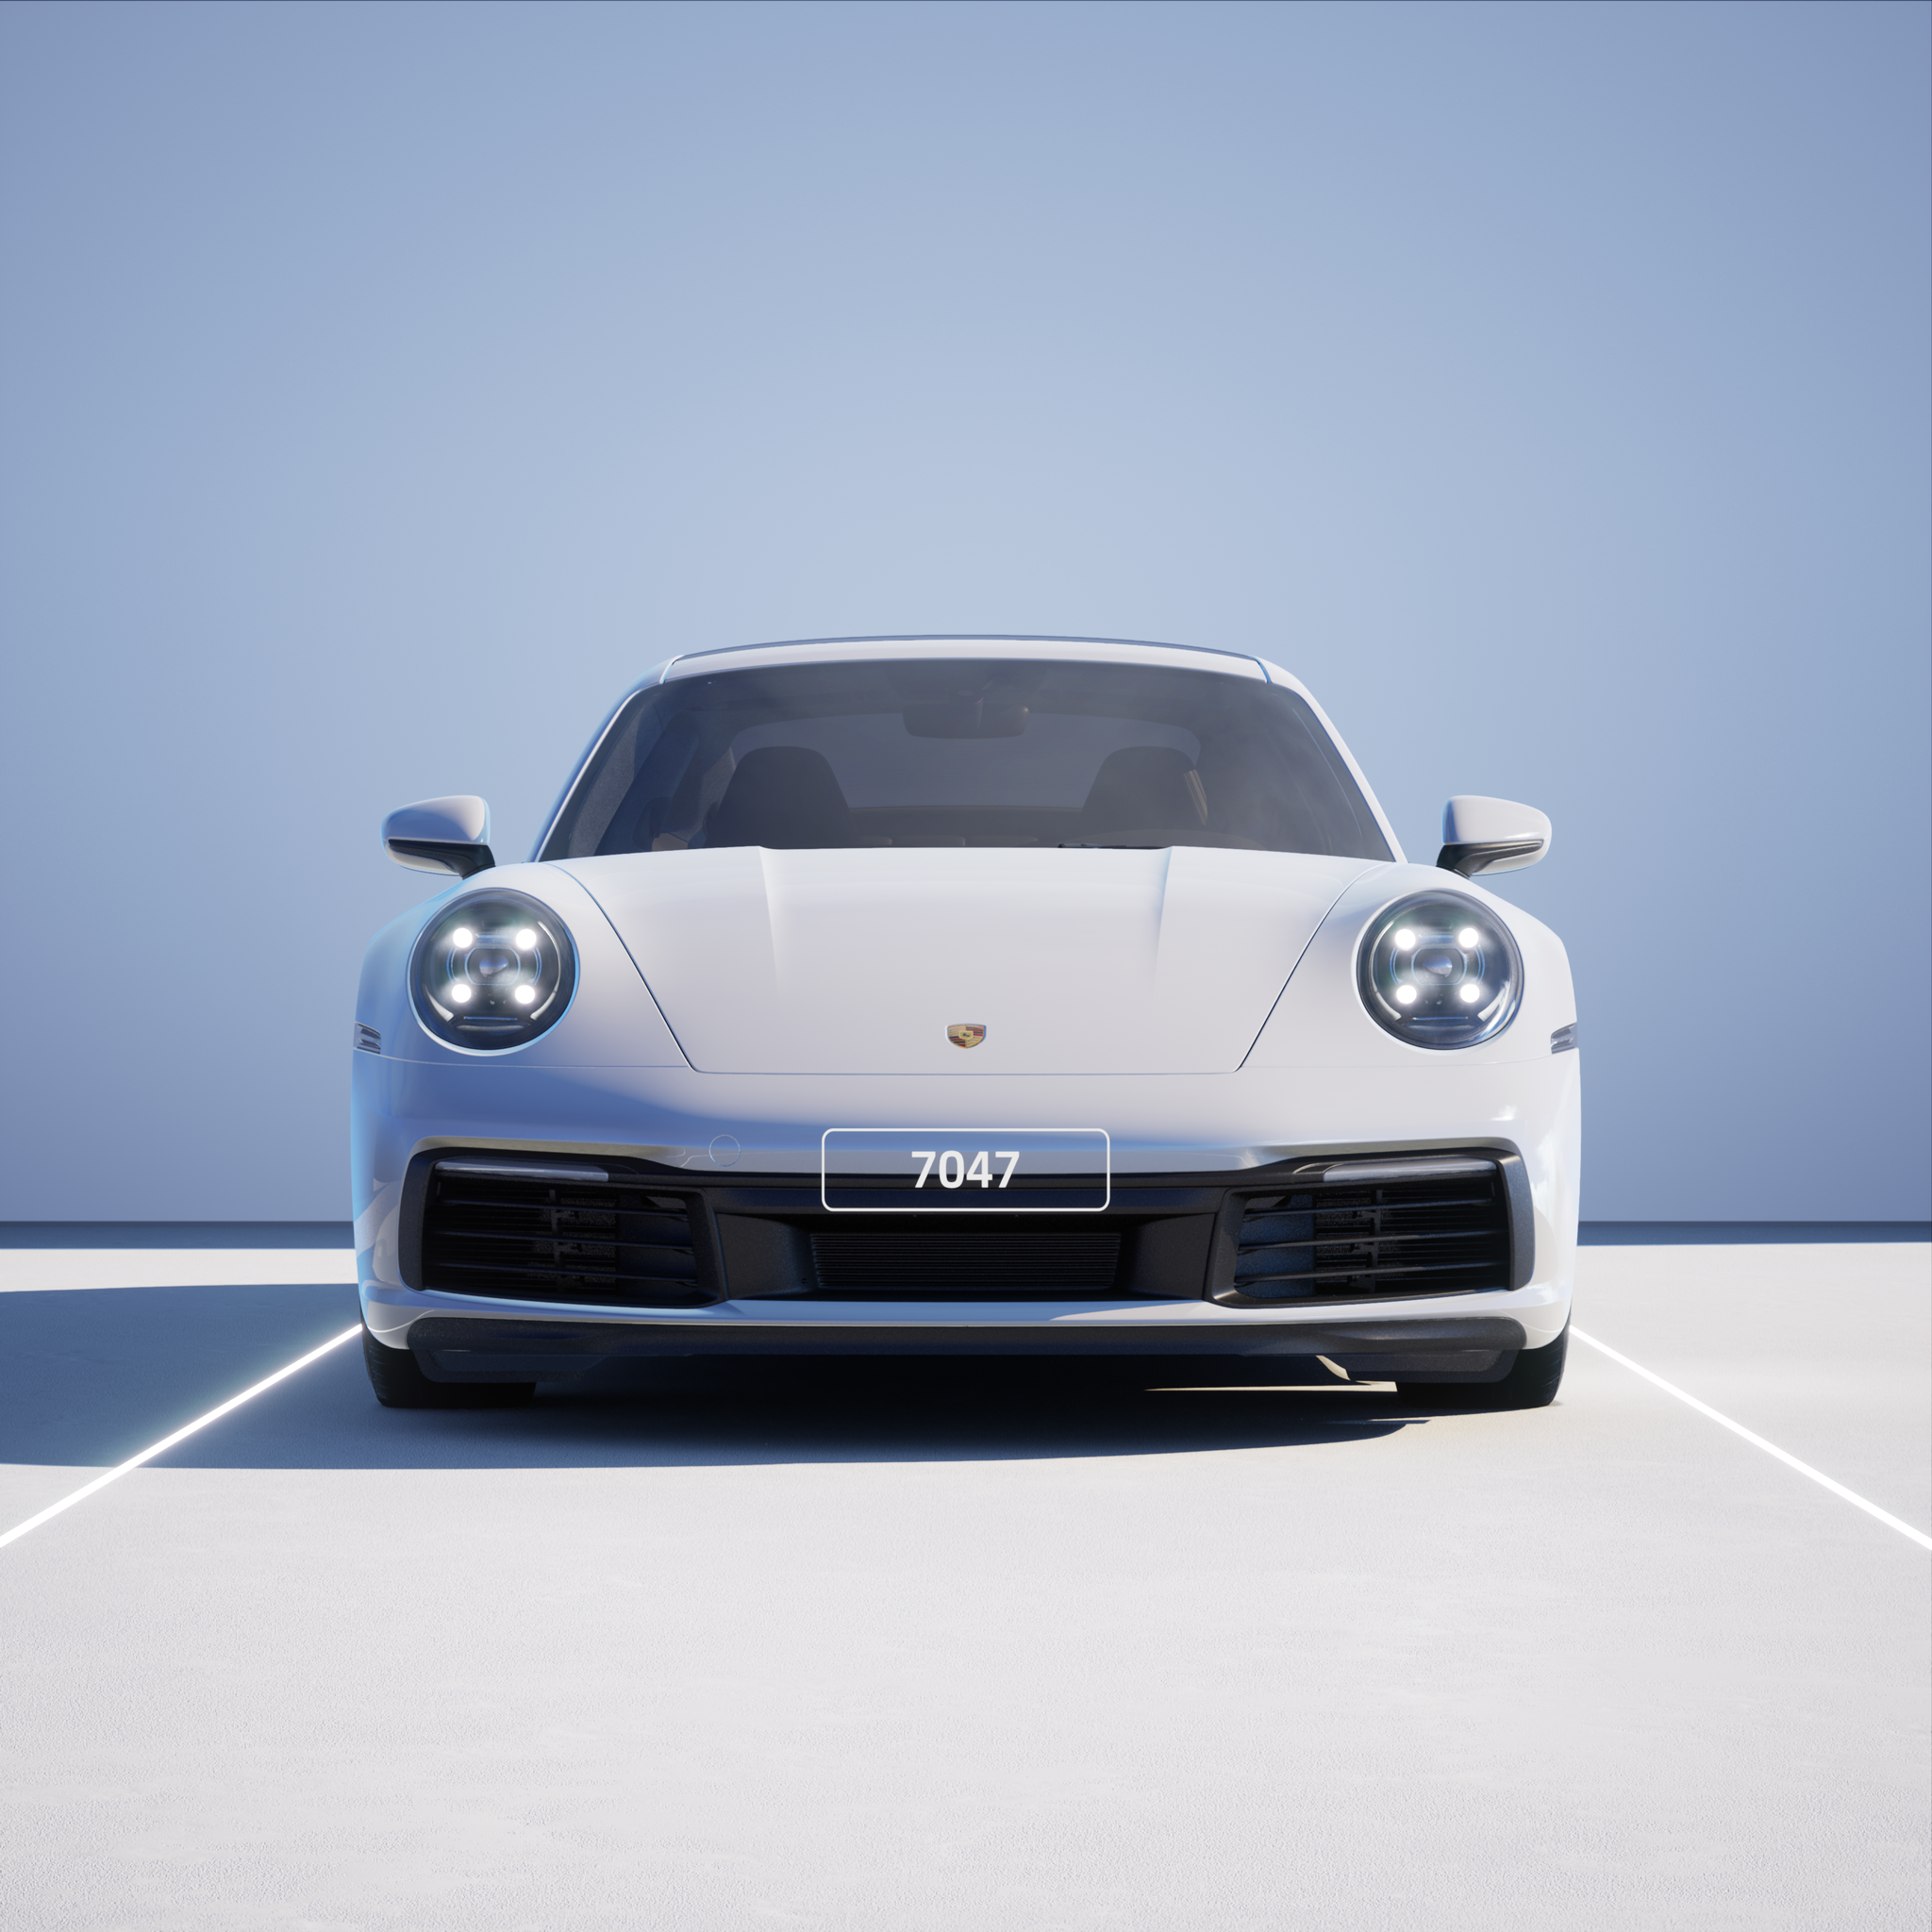 The PORSCHΞ 911 7047 image in phase